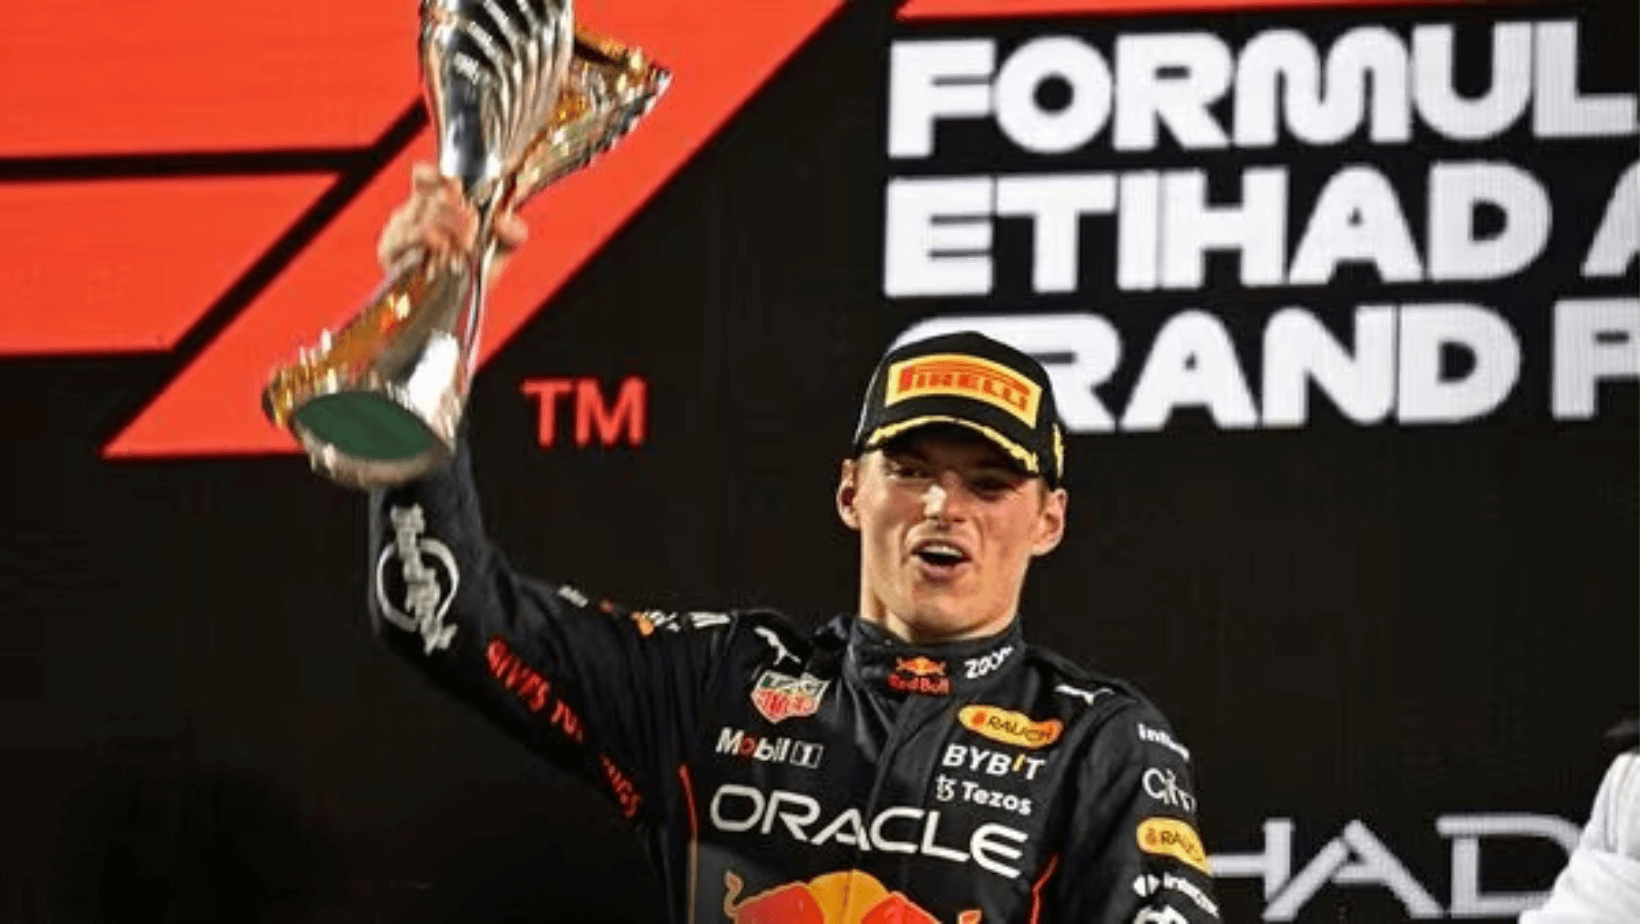 Max Verstappen beats Leclerc to victory in Abu Dhabi Grand Prix